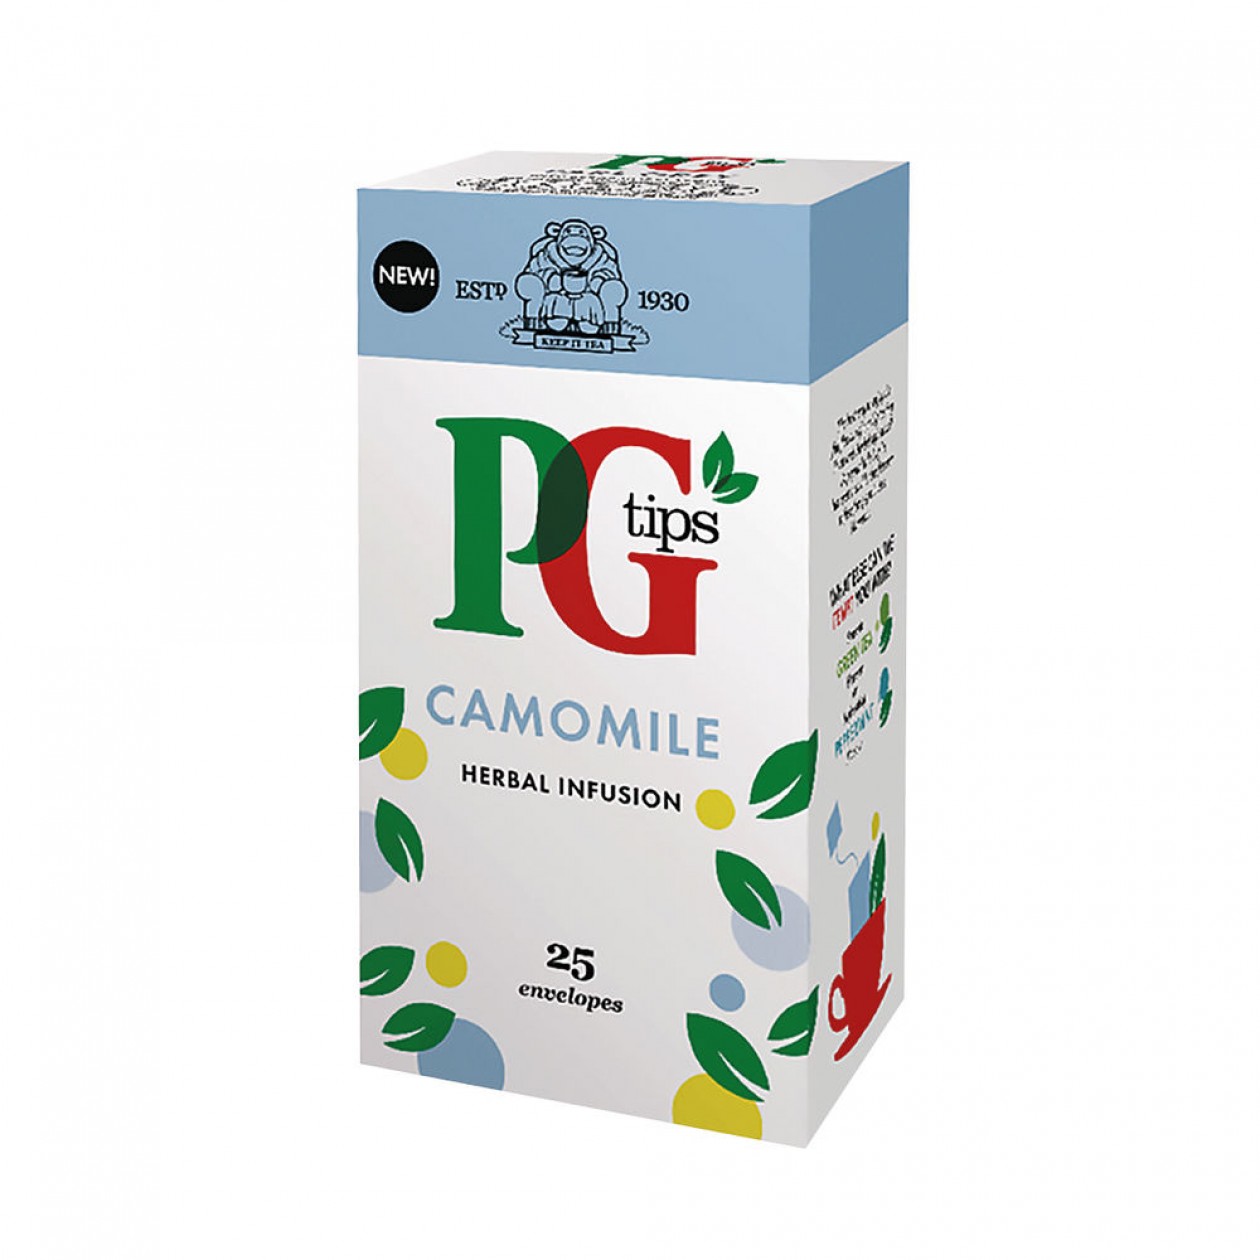 PG tips Camomile Infusion Tea Bags 25 Per Pack